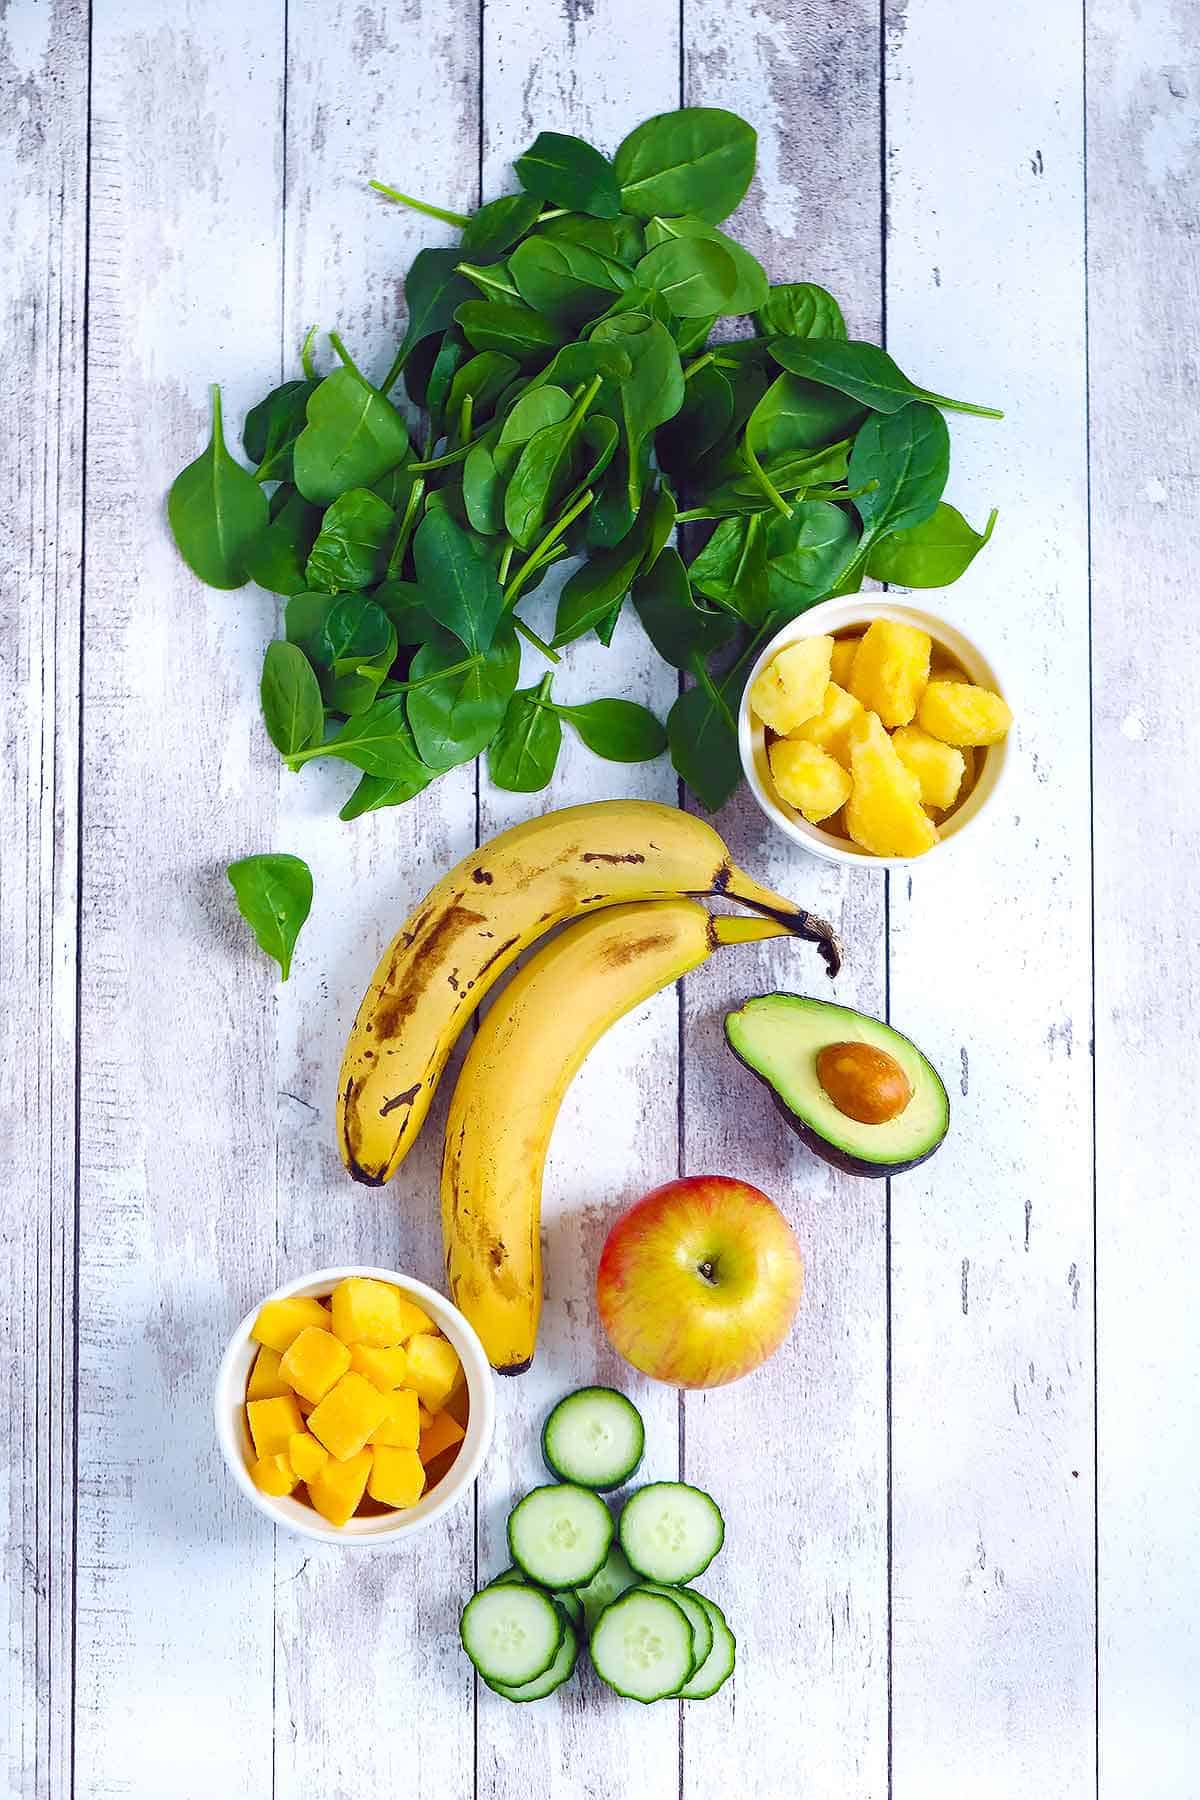 Flatlay of ingredients for a green smoothie.